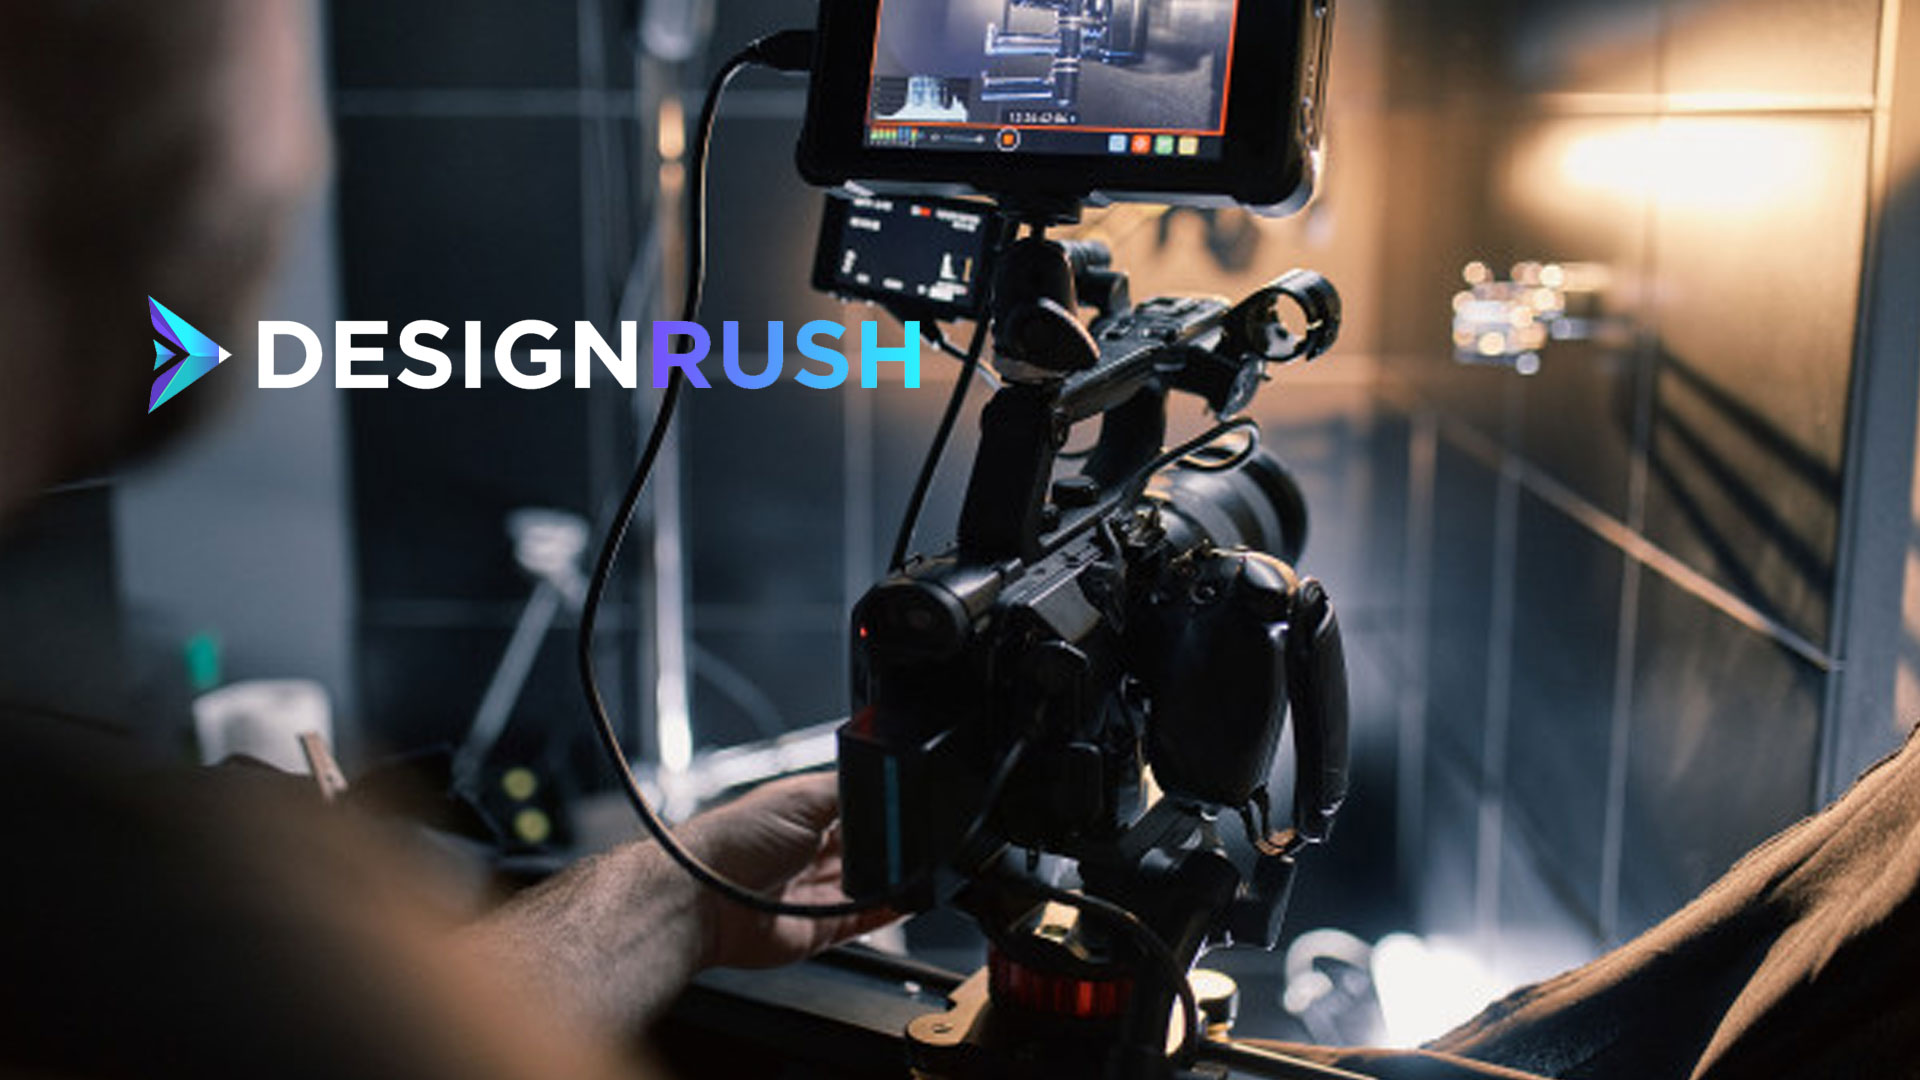 DesignRush Names Top Video Production Companies in March 2021